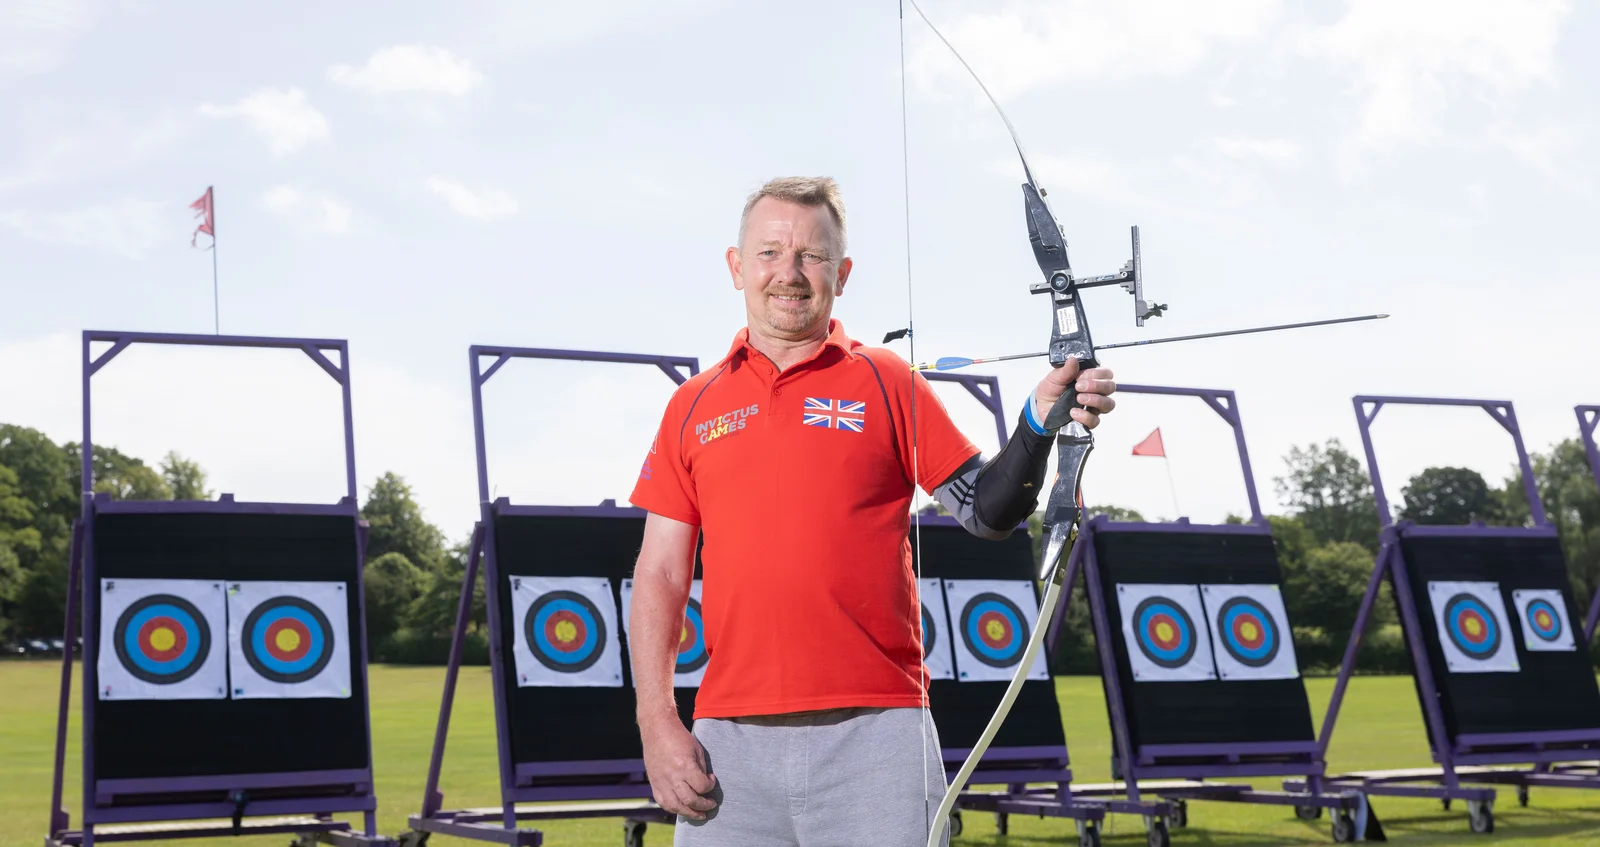 Al in a red Invictus Games t-shirt. He is looking straight at the camera smiling. In his left hand he's holding a crossbow . Behind him we can see some archery targets positioned on a green field.